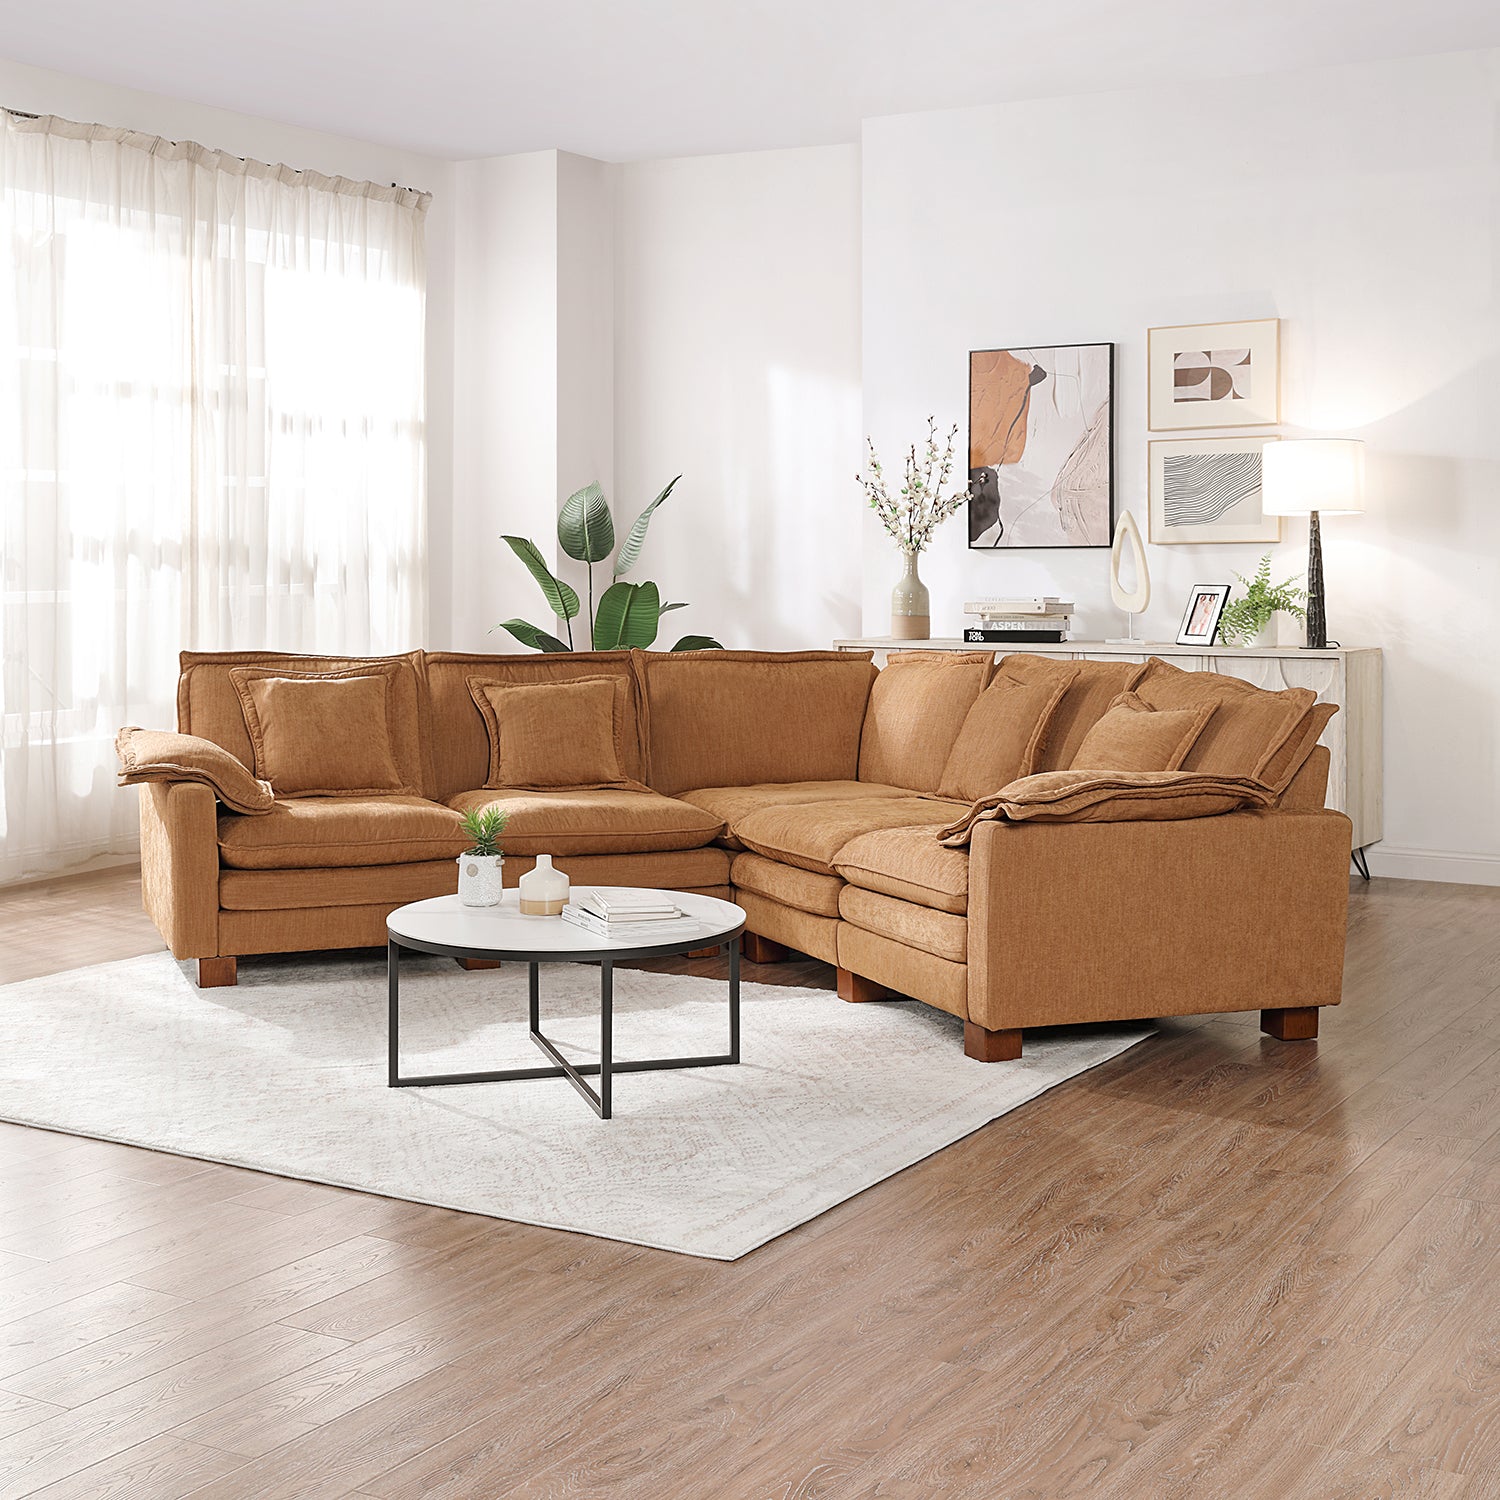 Stacked Tan Linen 5-Seat Corner Sectional